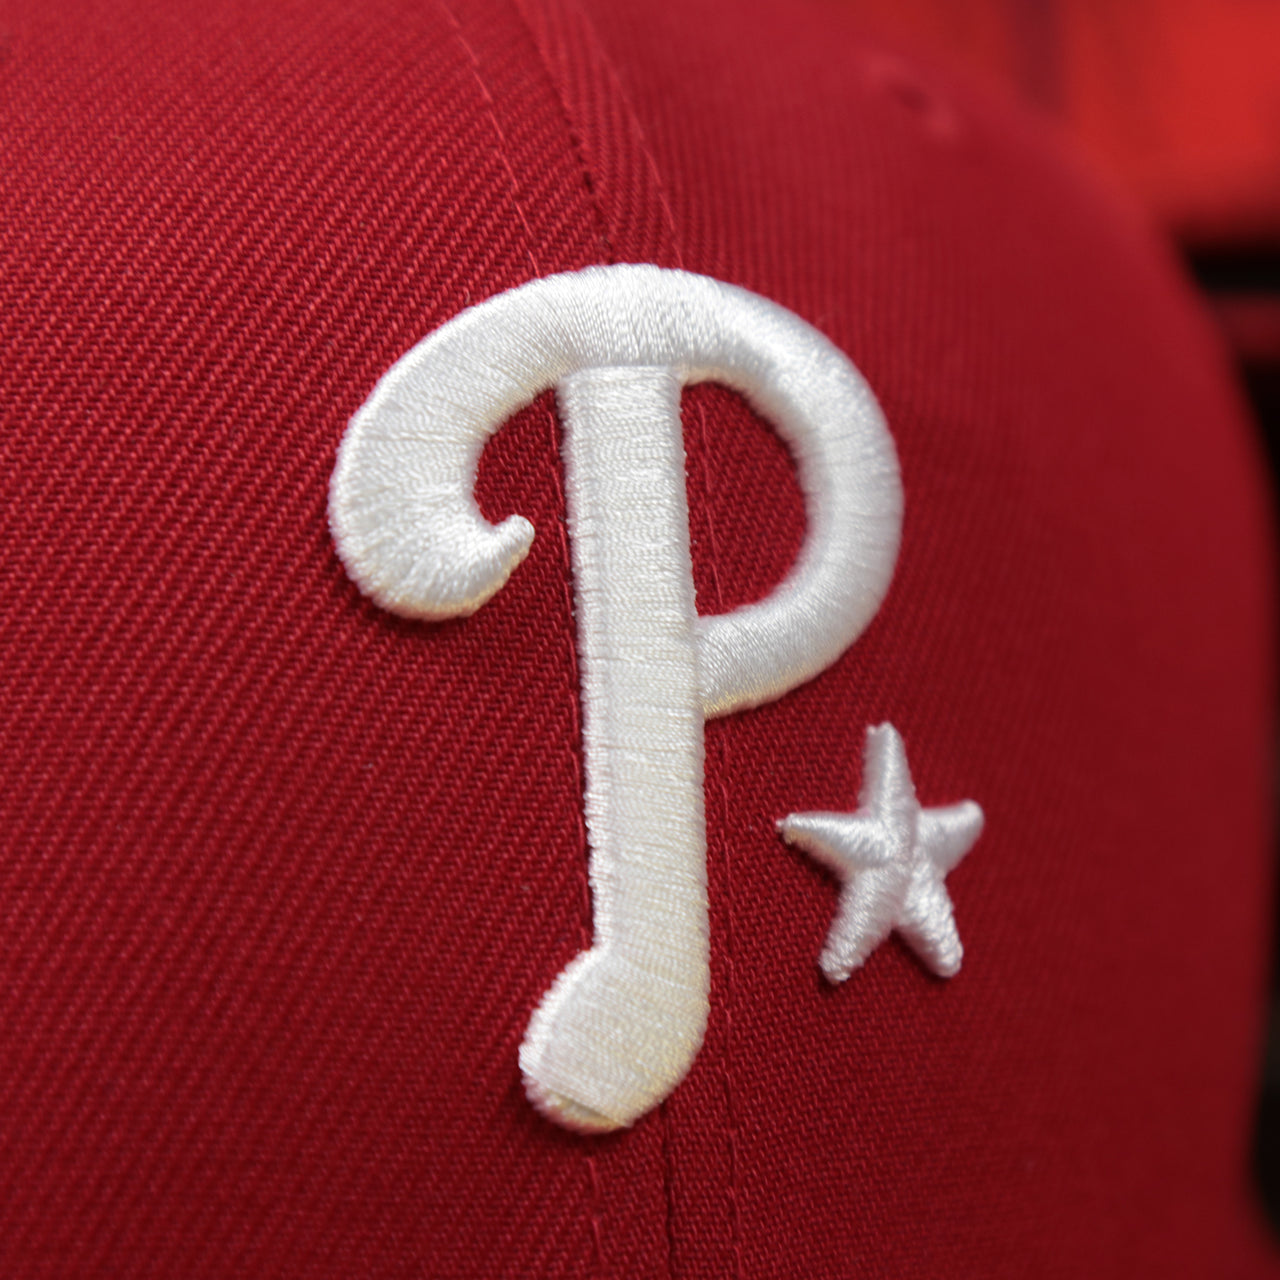 The Phillies Logo on the Philadelphia Phillies Metallic All Star Game MLB 2022 Side Patch 59Fifty Mesh Fitted Cap | ASG 2022 Red 59Fifty Cap